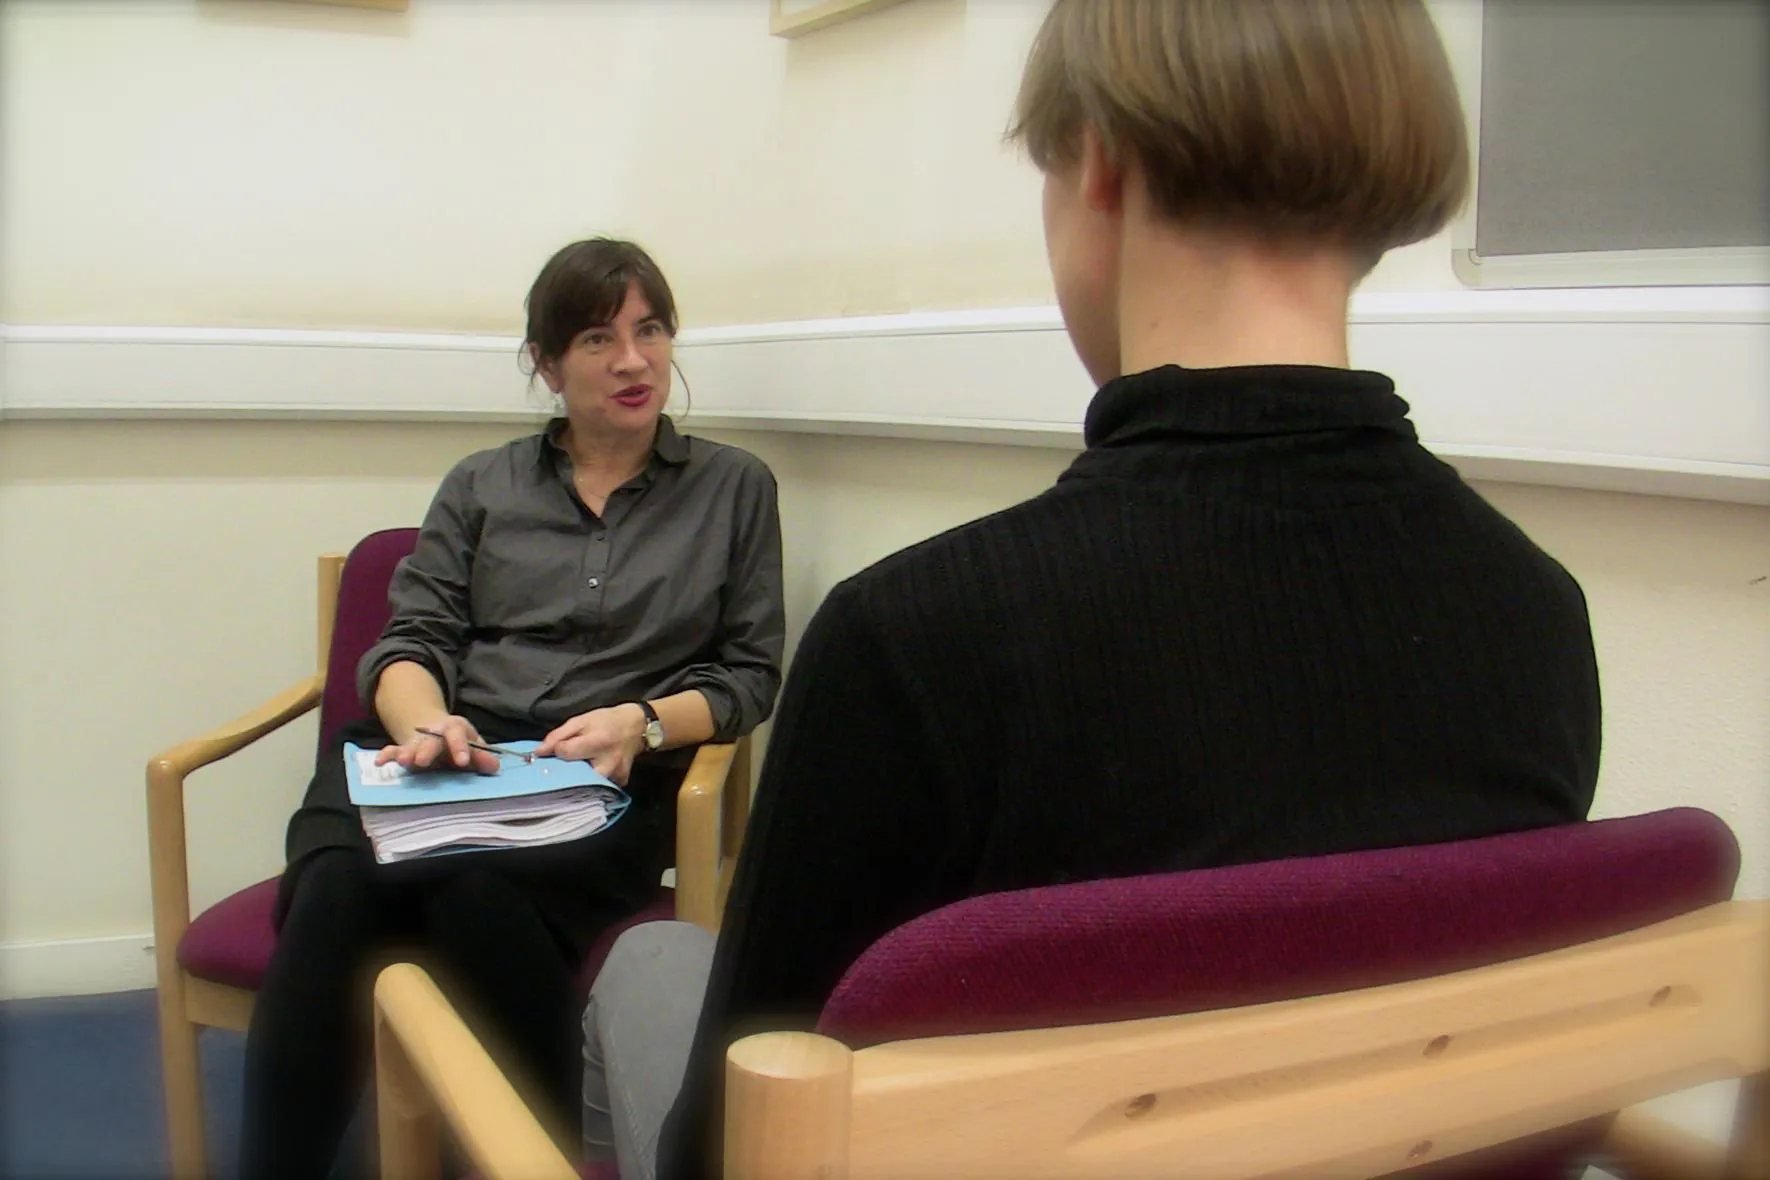 Two women talking during a therapy session